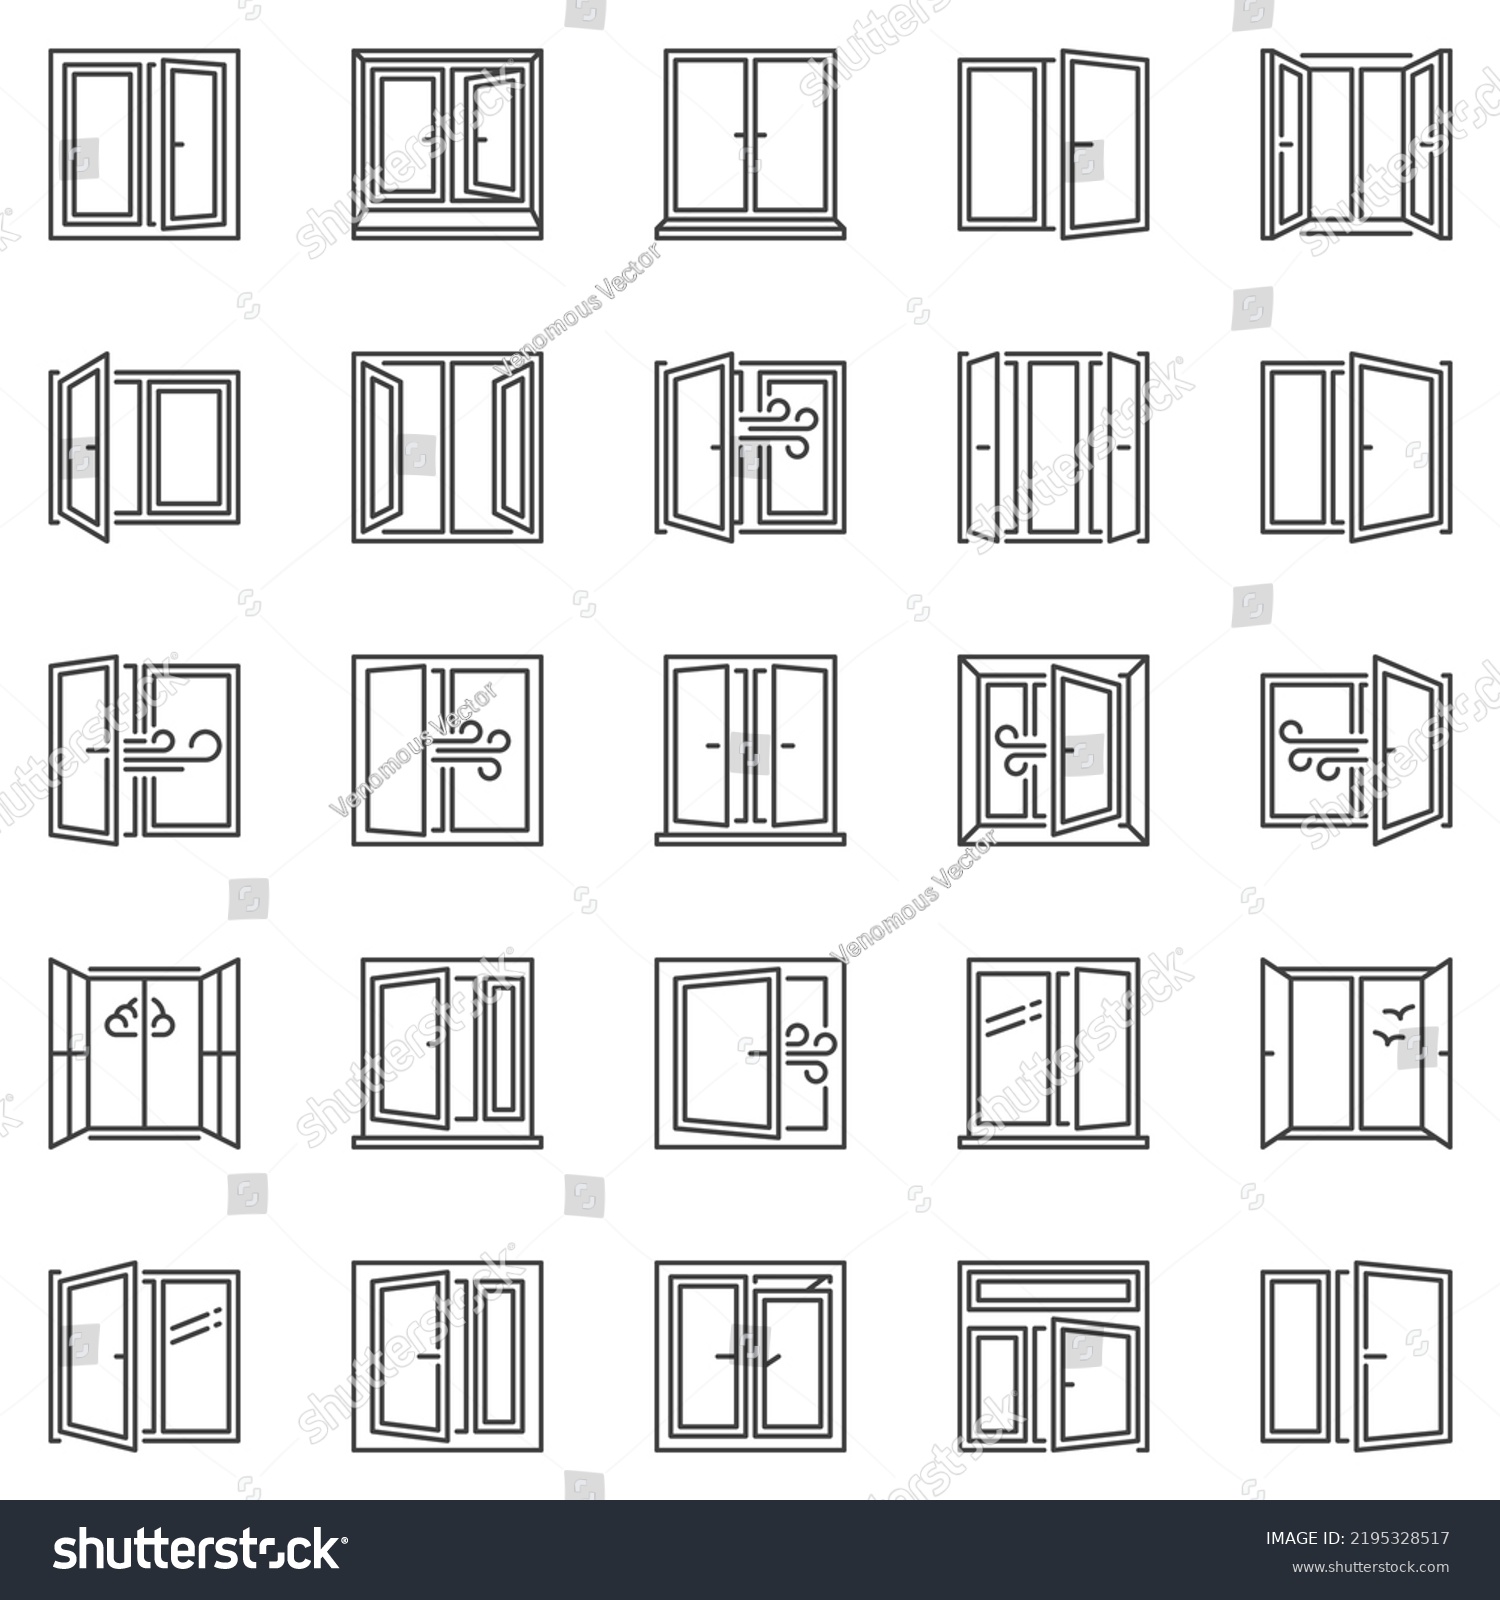 SVG of Windows outline icons set. Window concept symbols collection in thin line style. Room Ventilation signs svg